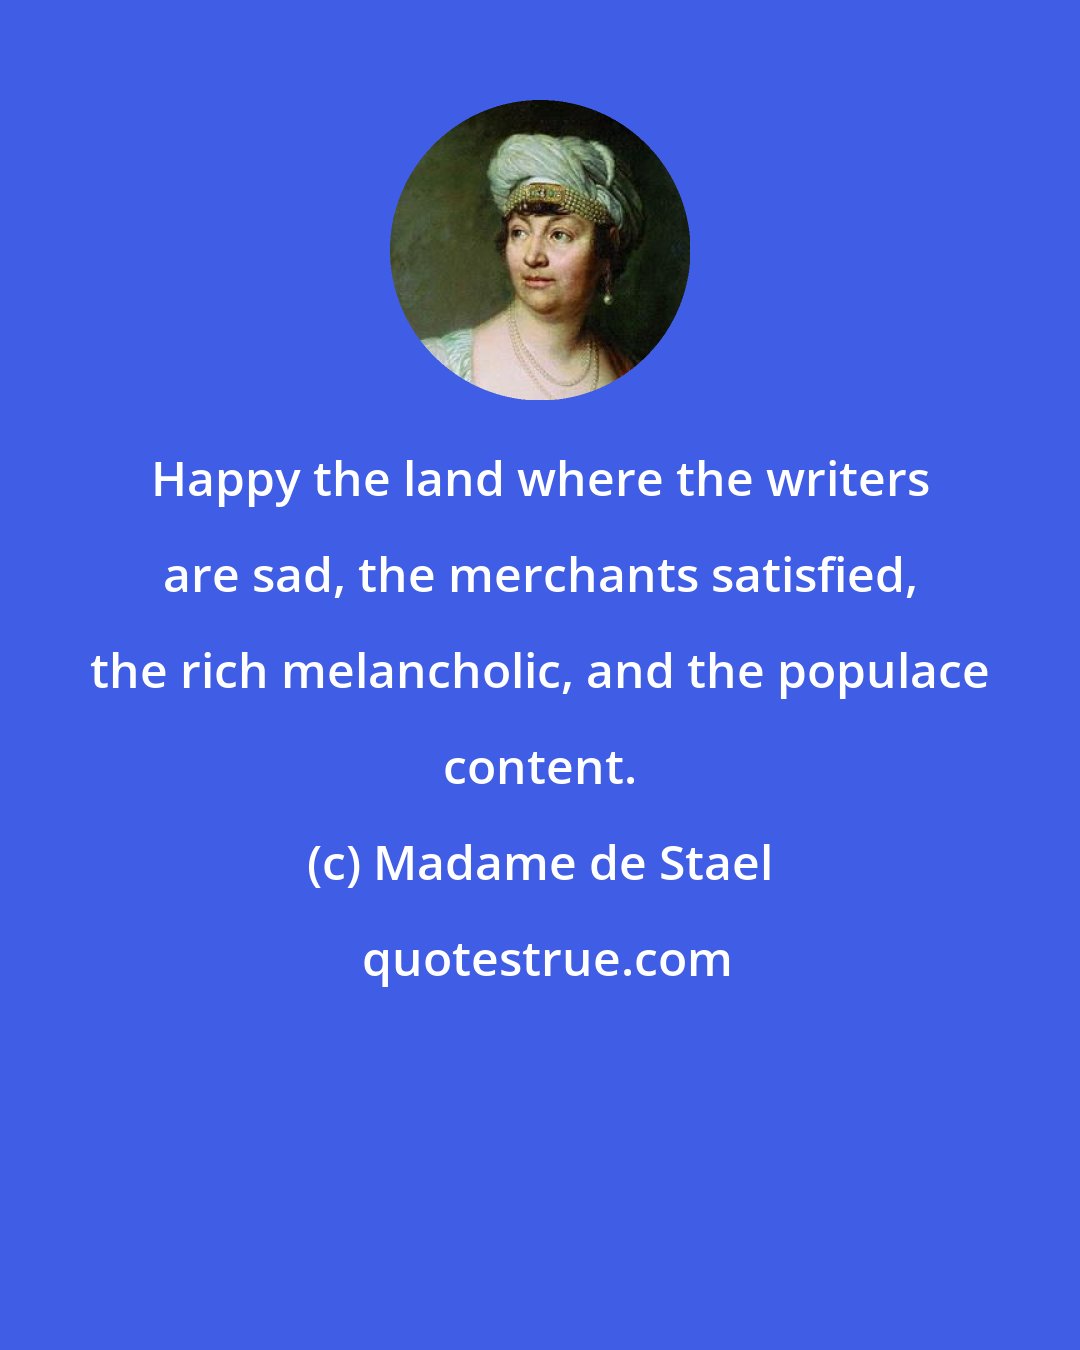 Madame de Stael: Happy the land where the writers are sad, the merchants satisfied, the rich melancholic, and the populace content.